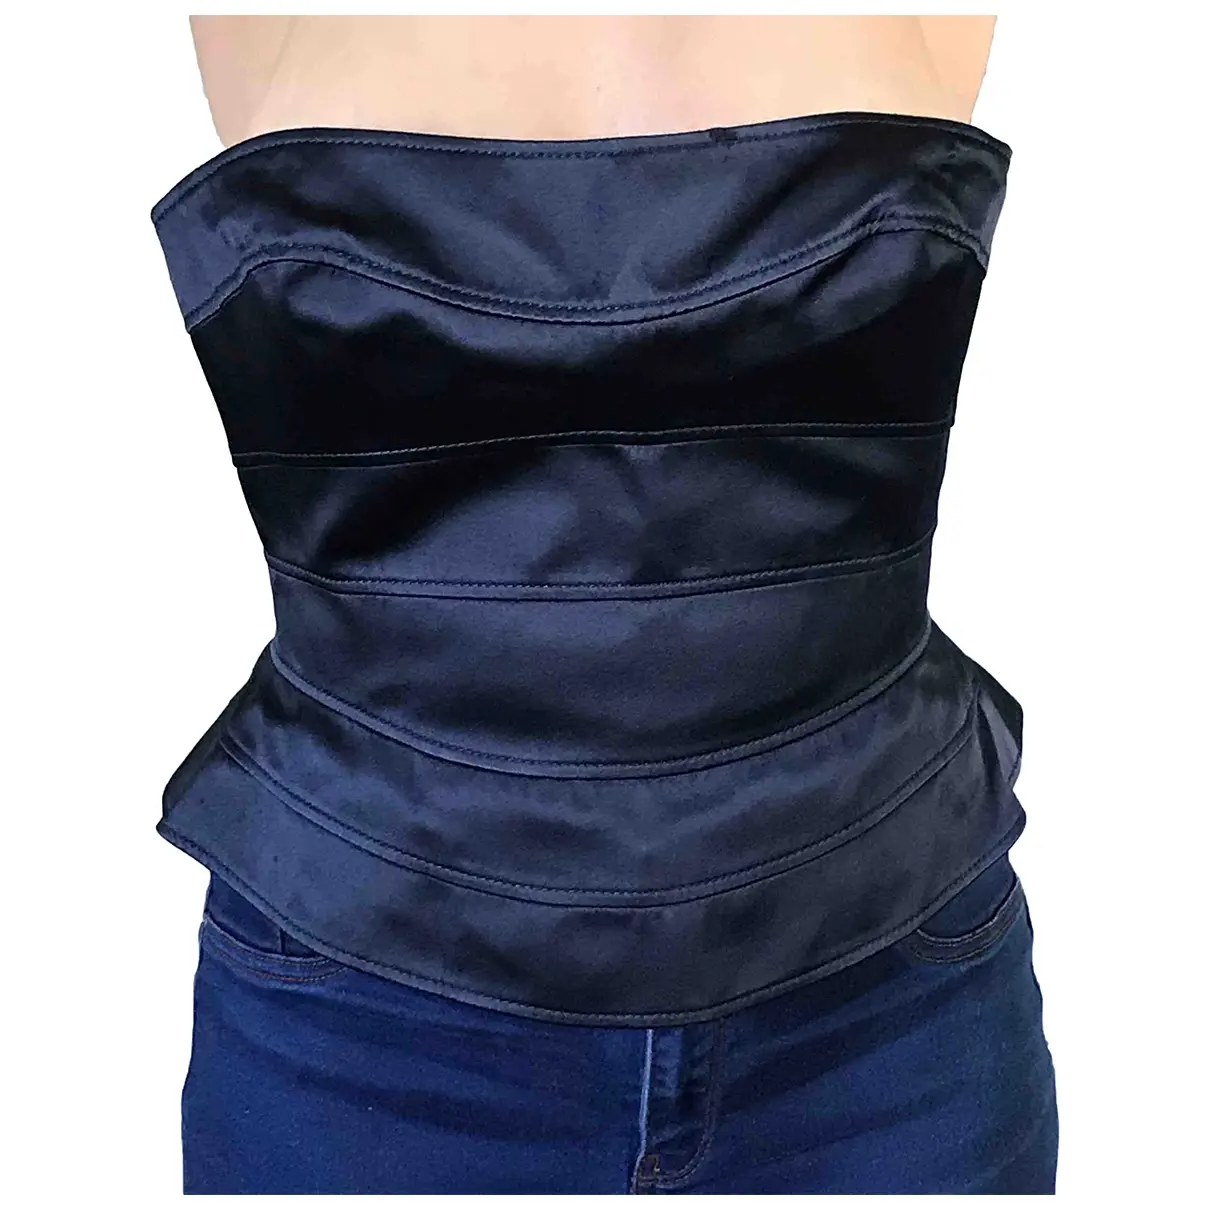 Thierry Mugler Silk corset for sale - Vintage